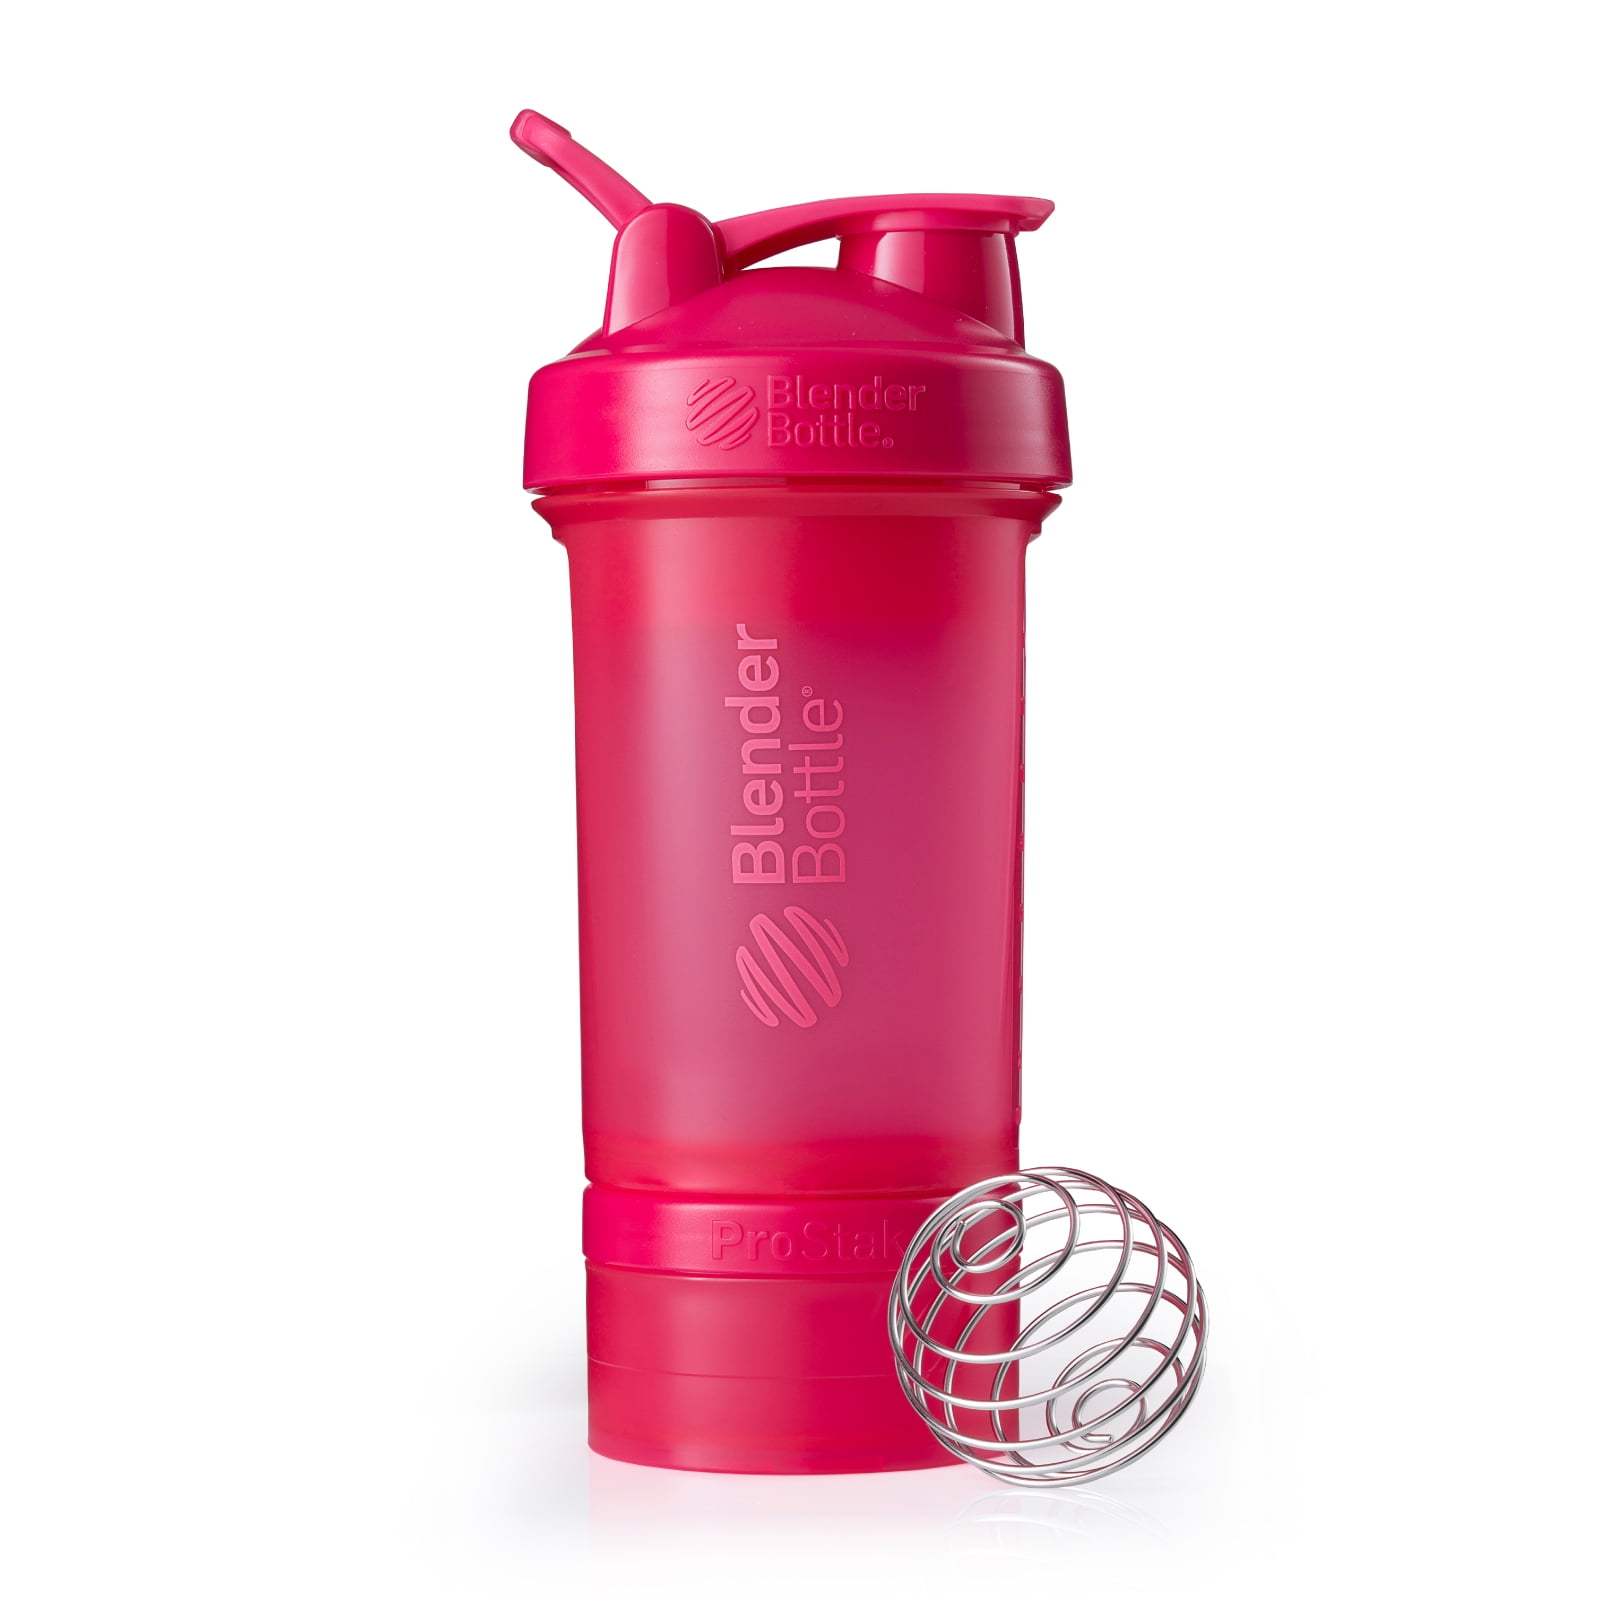 ProStak Shaker Bottle with Wire Whisk BlenderBall and Interlocking Storage  Containers - Rose Pink (22 fl oz.)